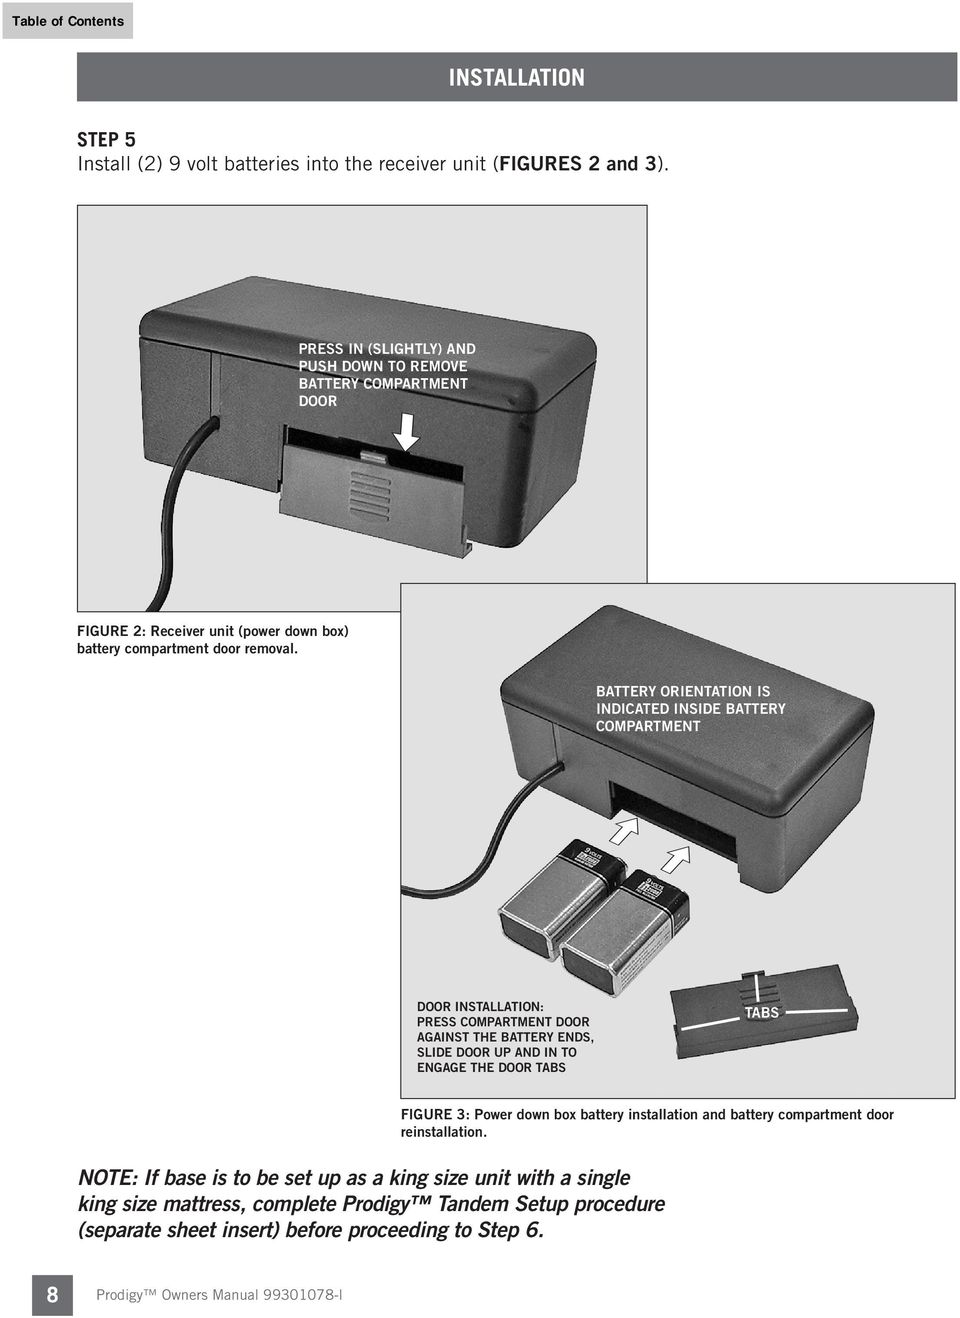 BATTERY ORIENTATION IS INDICATED INSIDE BATTERY COMPARTMENT DOOR INSTALLATION: PRESS COMPARTMENT DOOR AGAINST THE BATTERY ENDS, SLIDE DOOR UP AND IN TO ENGAGE THE DOOR TABS TABS